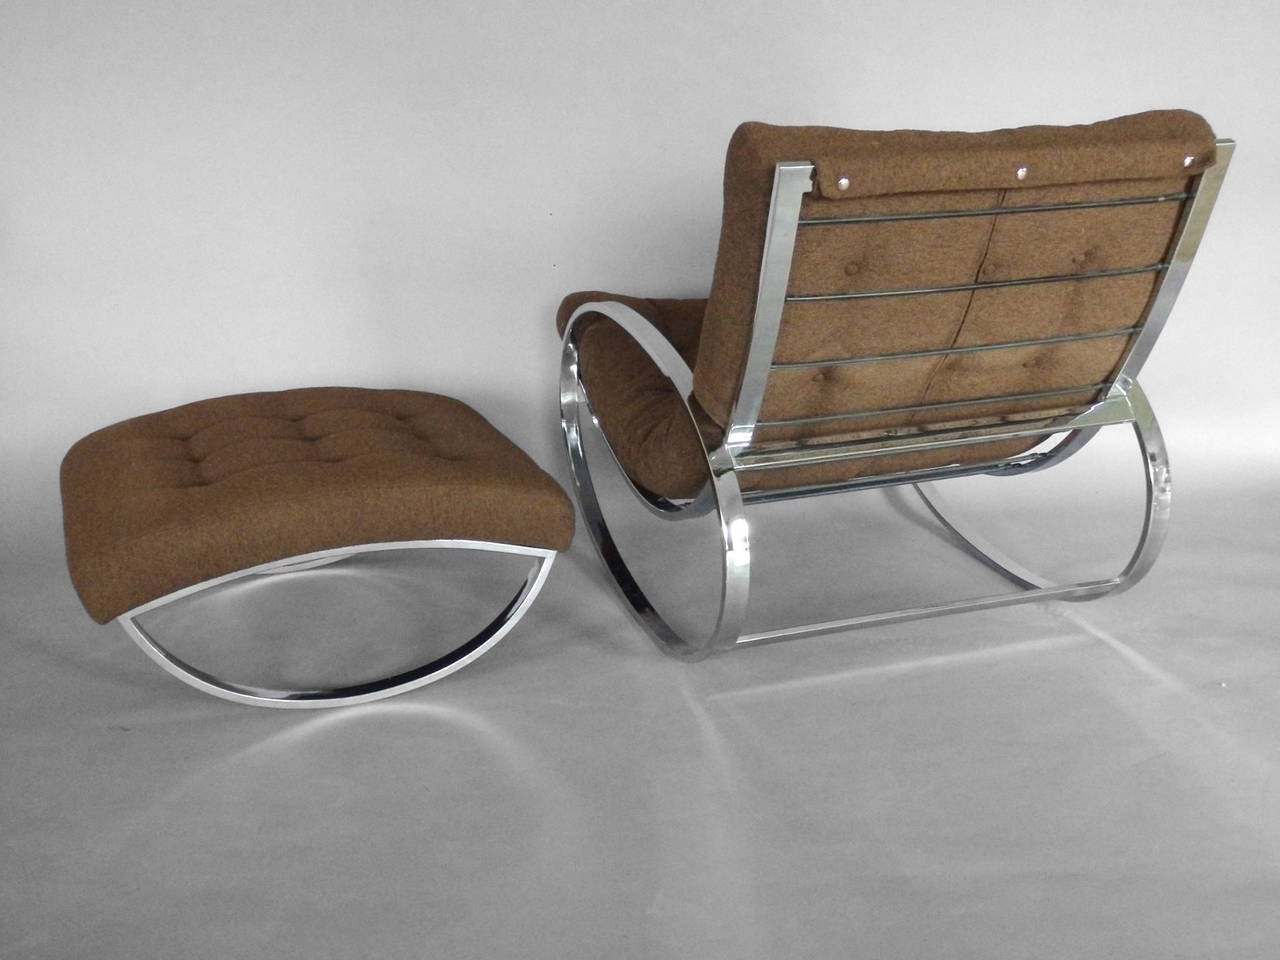 Chrome Tube Milo Baughman Style Rocker with Ottoman in Brown Boucle by Renato Zevi.
Chair: 27.5" wide x 38" deep x 32" tall
Ottoman: 27" deep x 25" wide x 19" tall